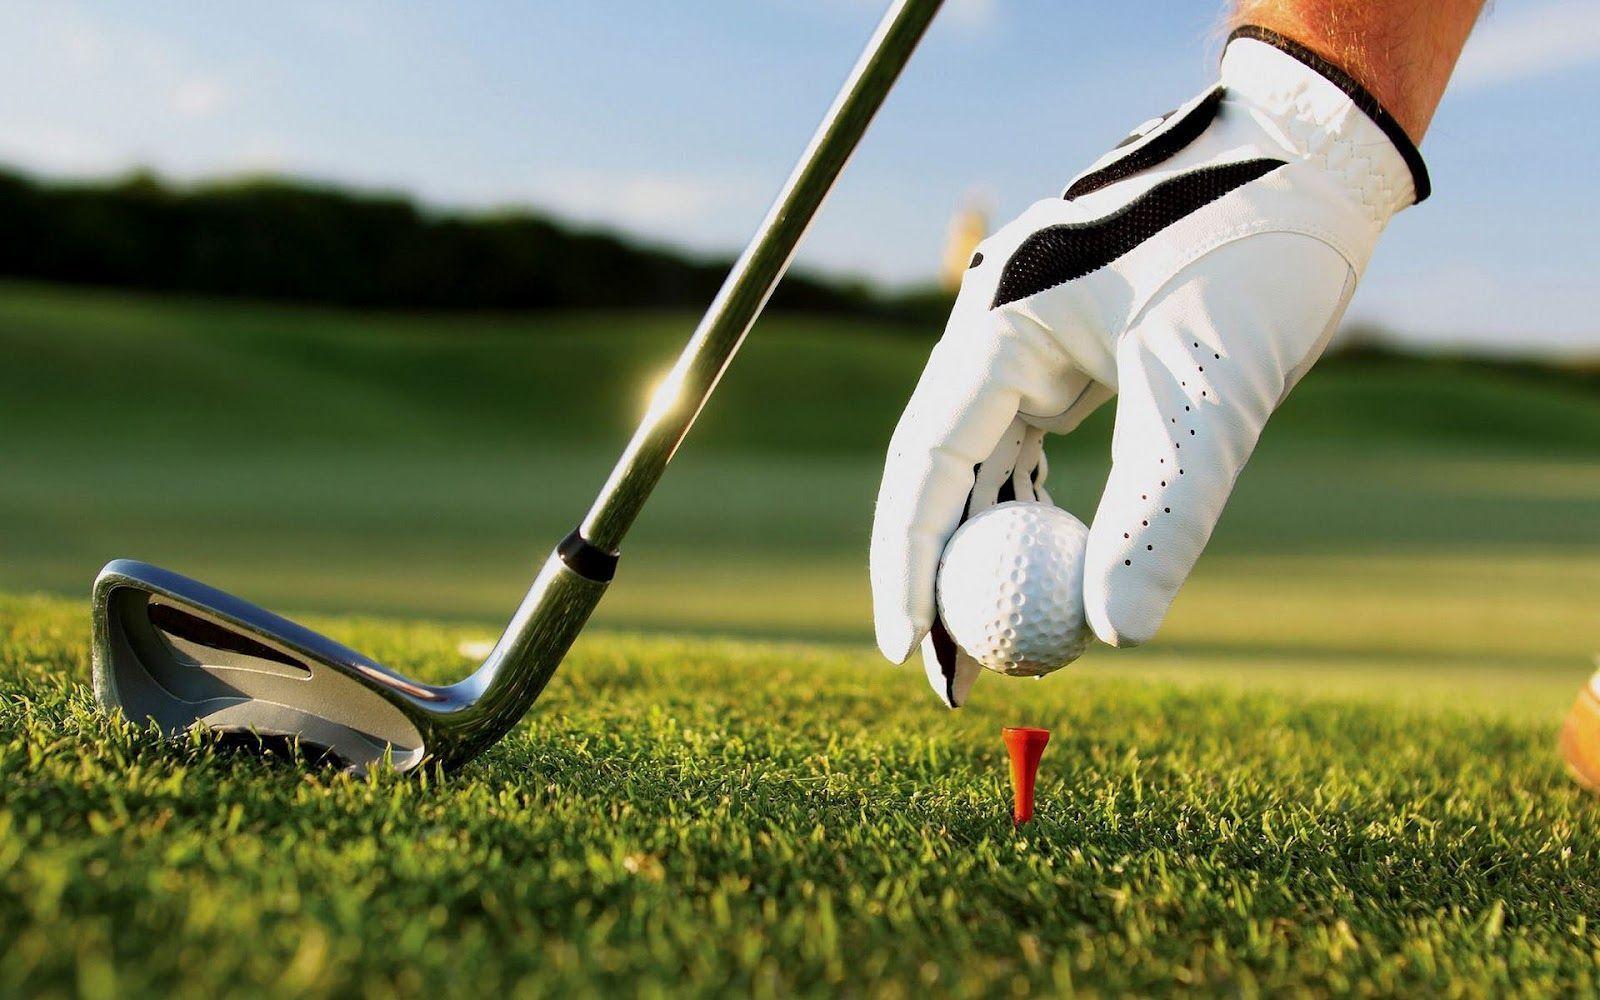 awesome Golf Wallpapers HD